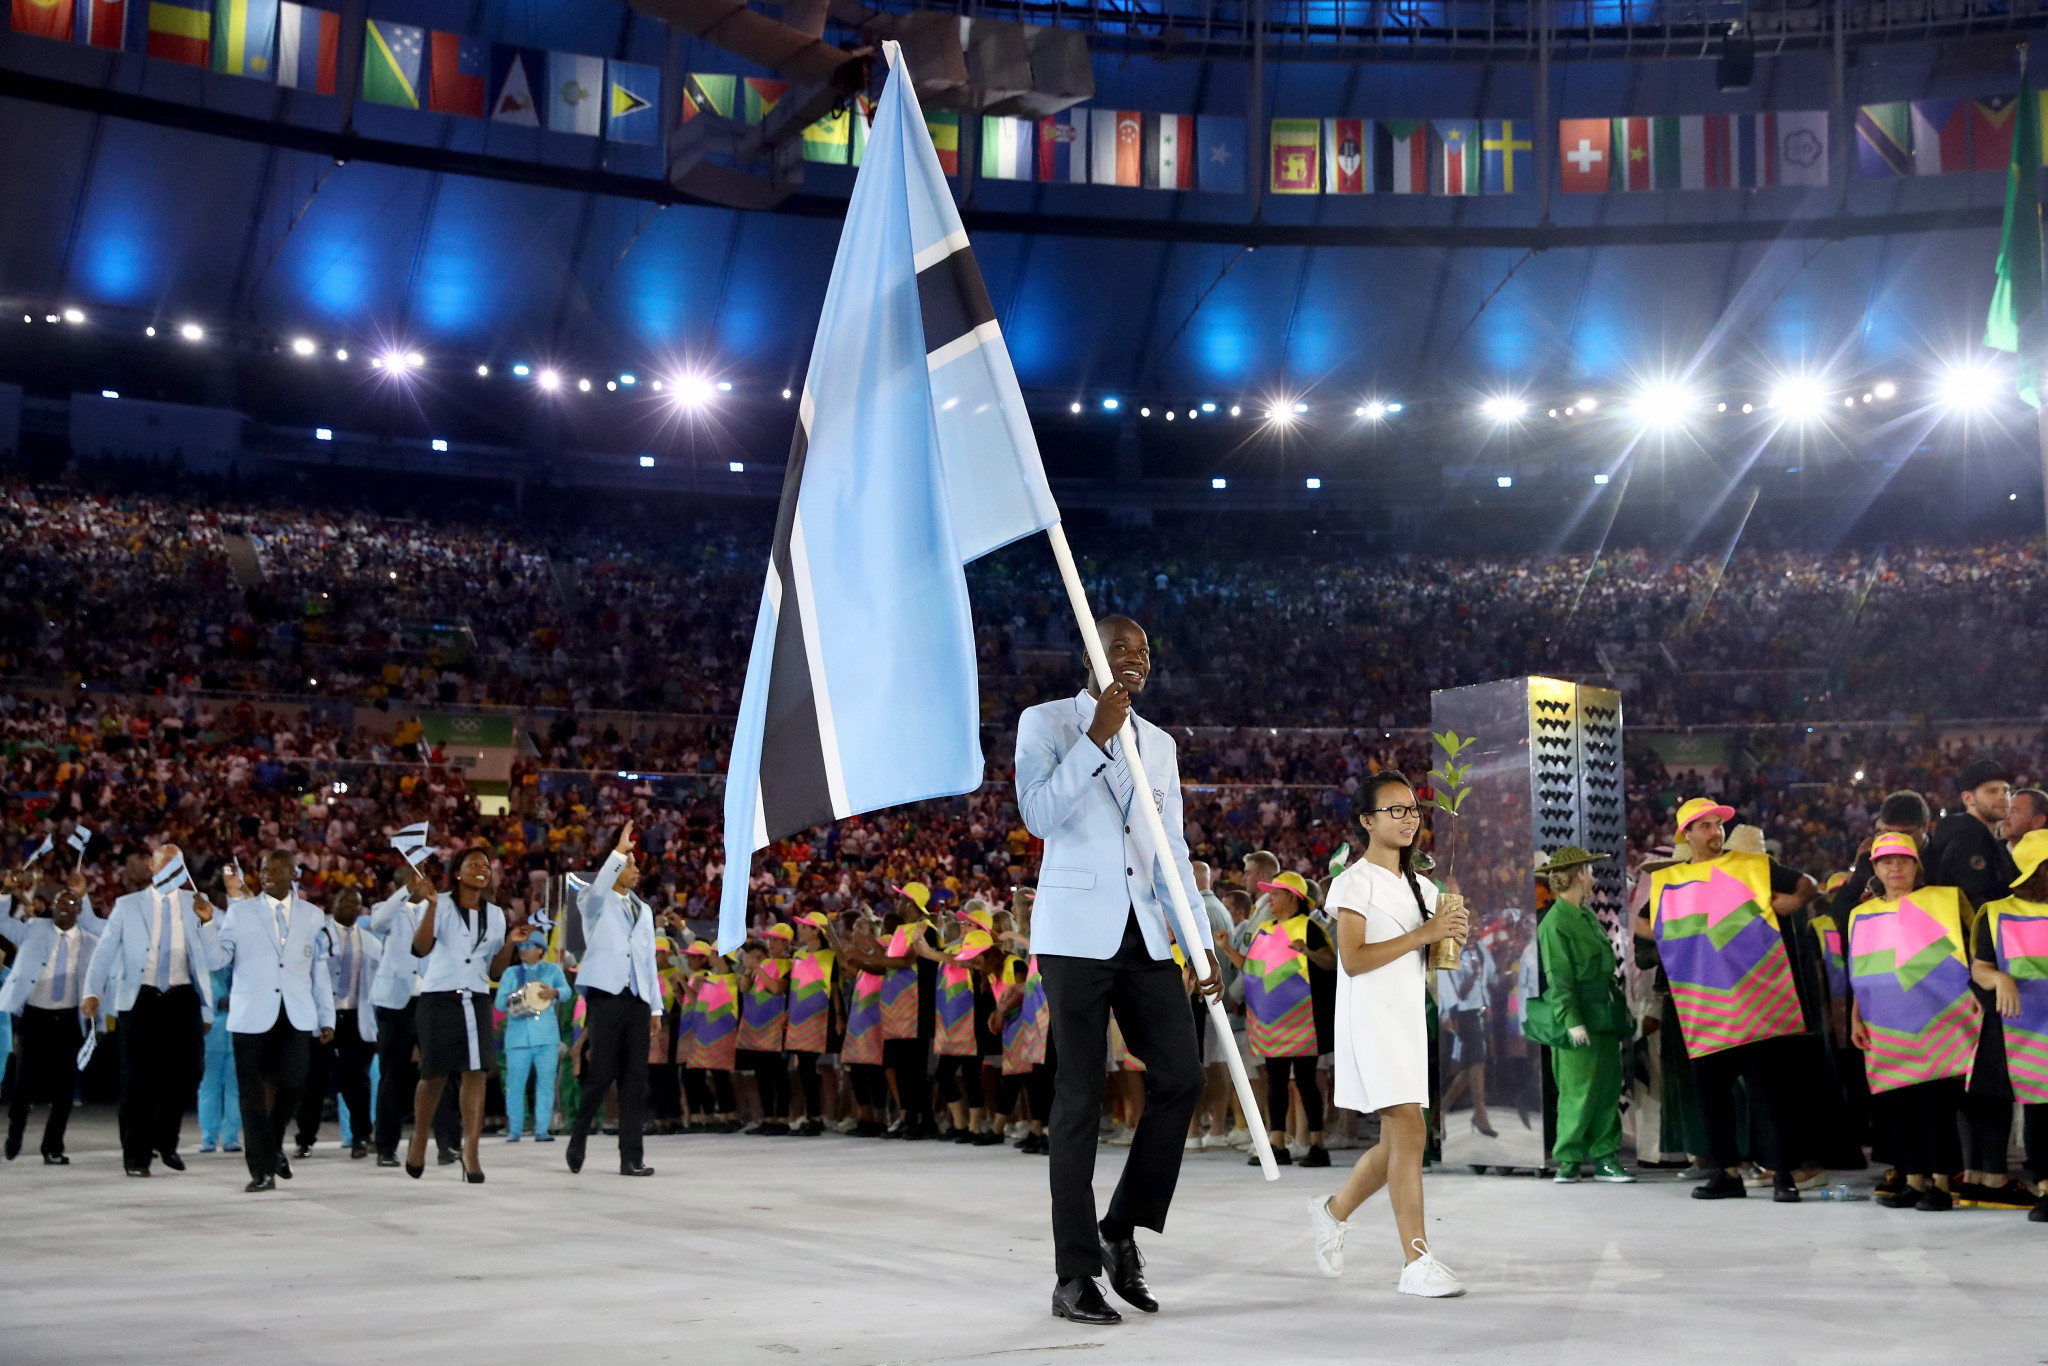 The Botswana National Olympic Committee has signed a sponsorship deal with Mascom ©Getty Images